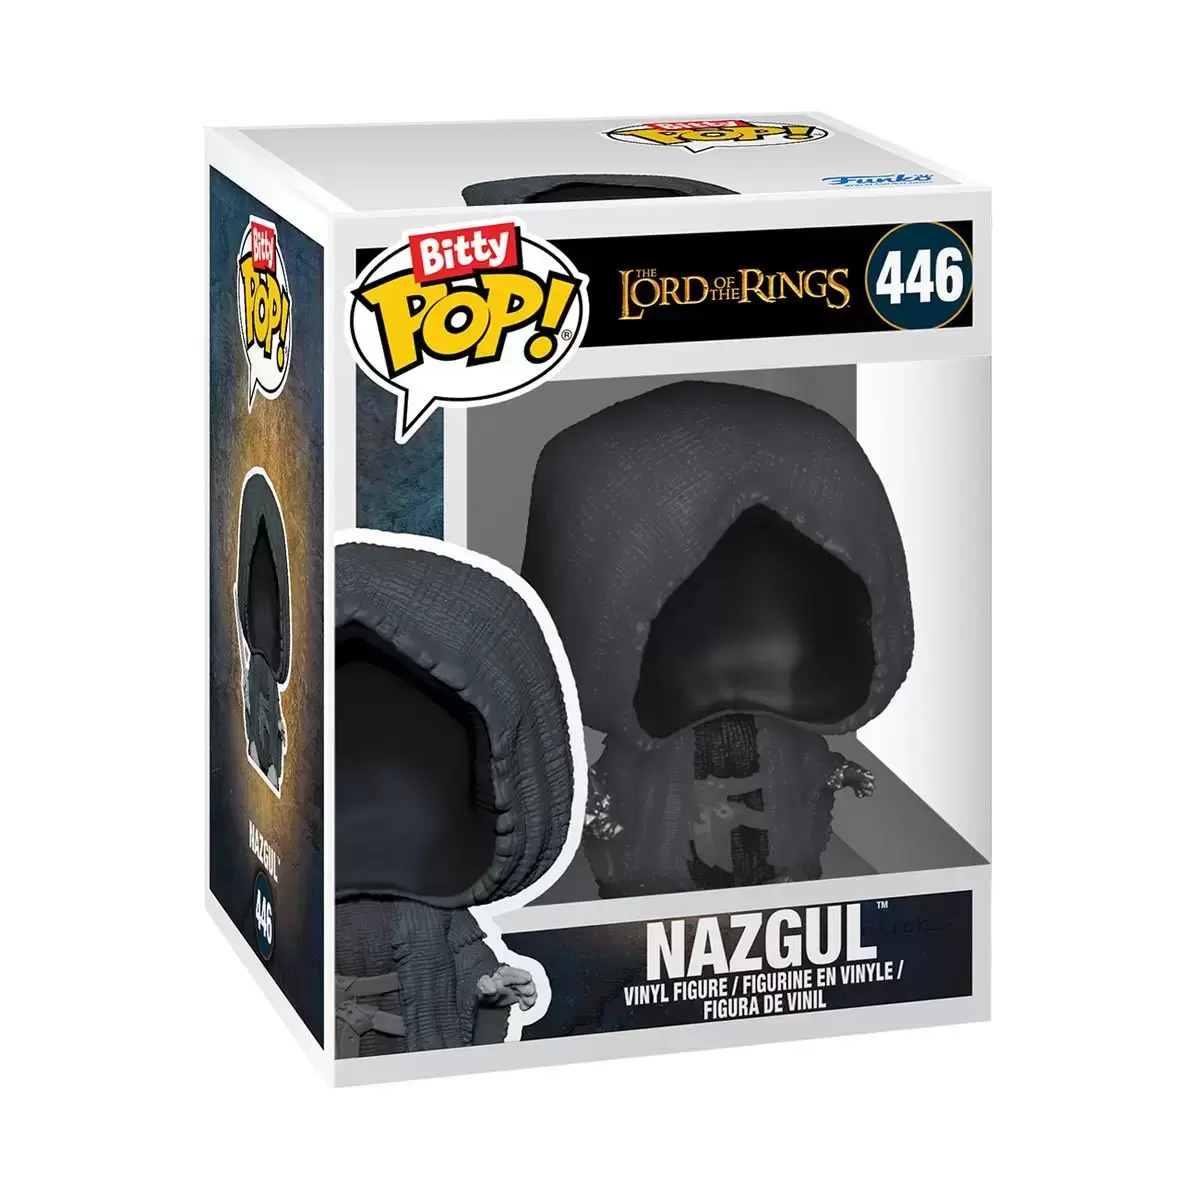 Bitty POP! - Lord of The Rings - Nazgul